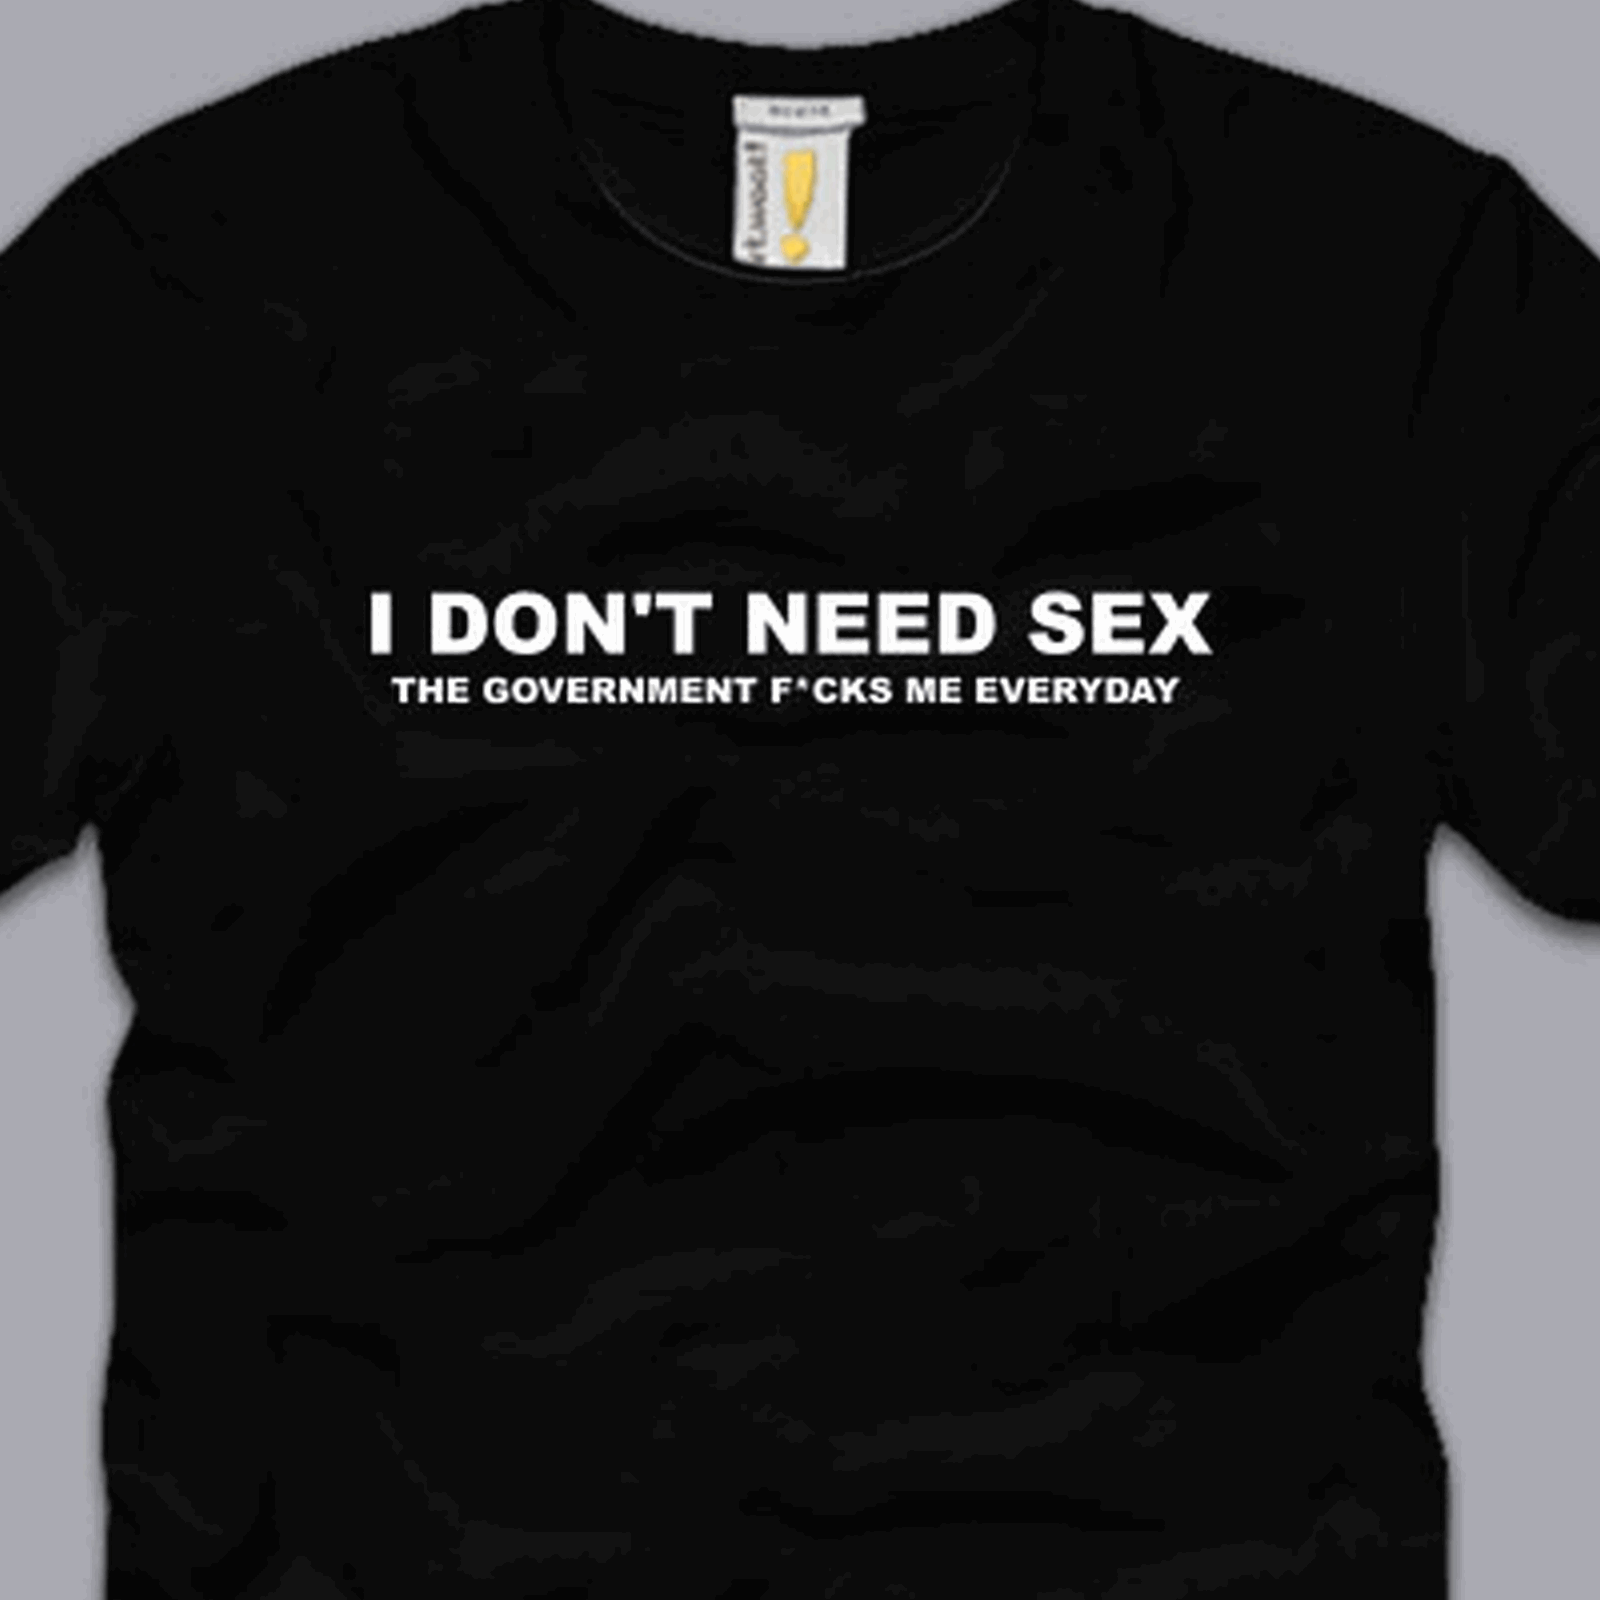 I Dont Need Sex T Shirt S M L Xl 2xl 3xl Funny Anti Government Taxes 2998